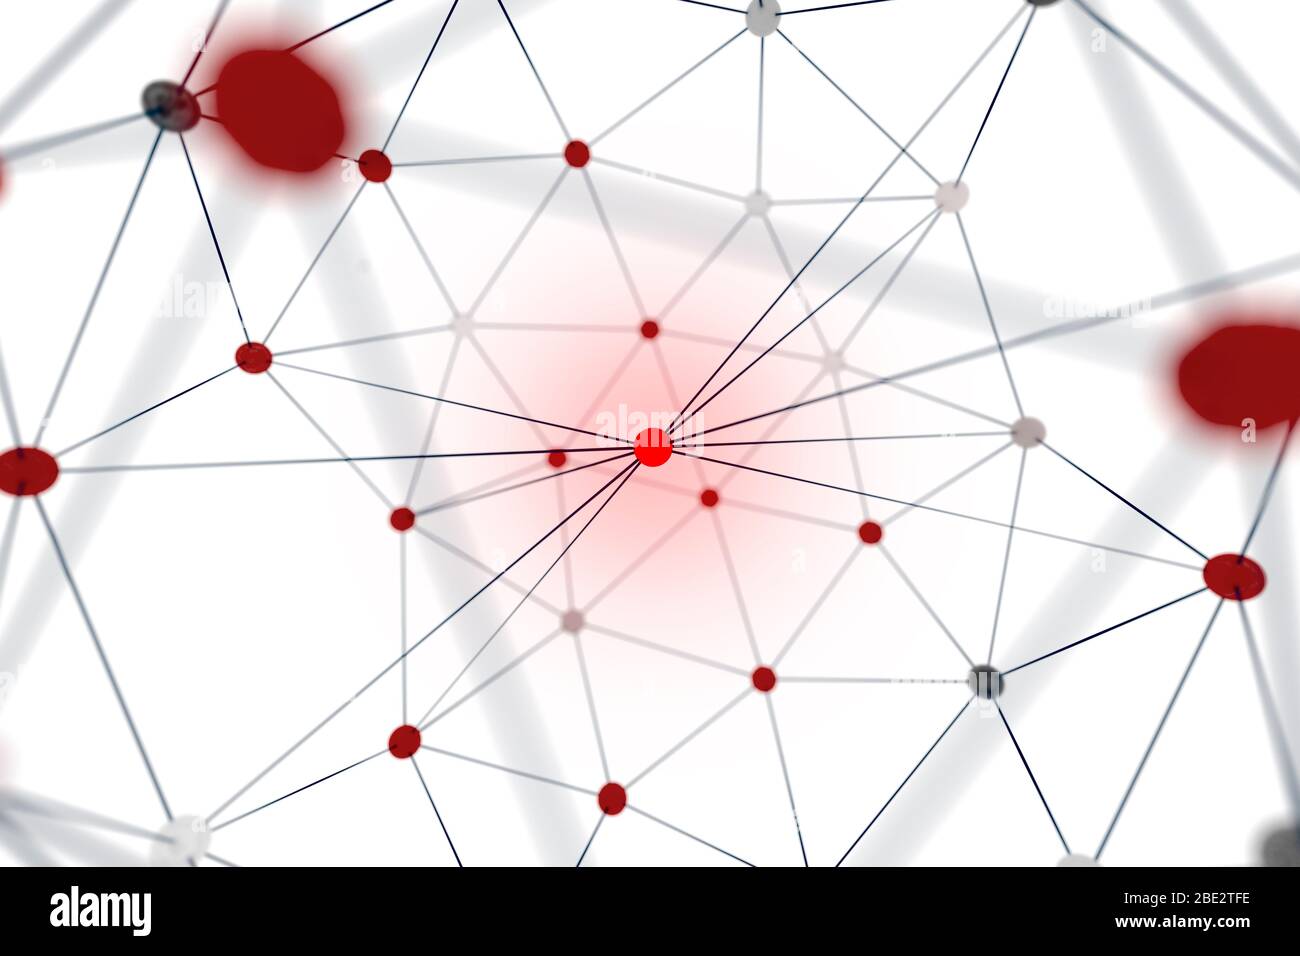 3d rendering of a network with a red center Stock Photo